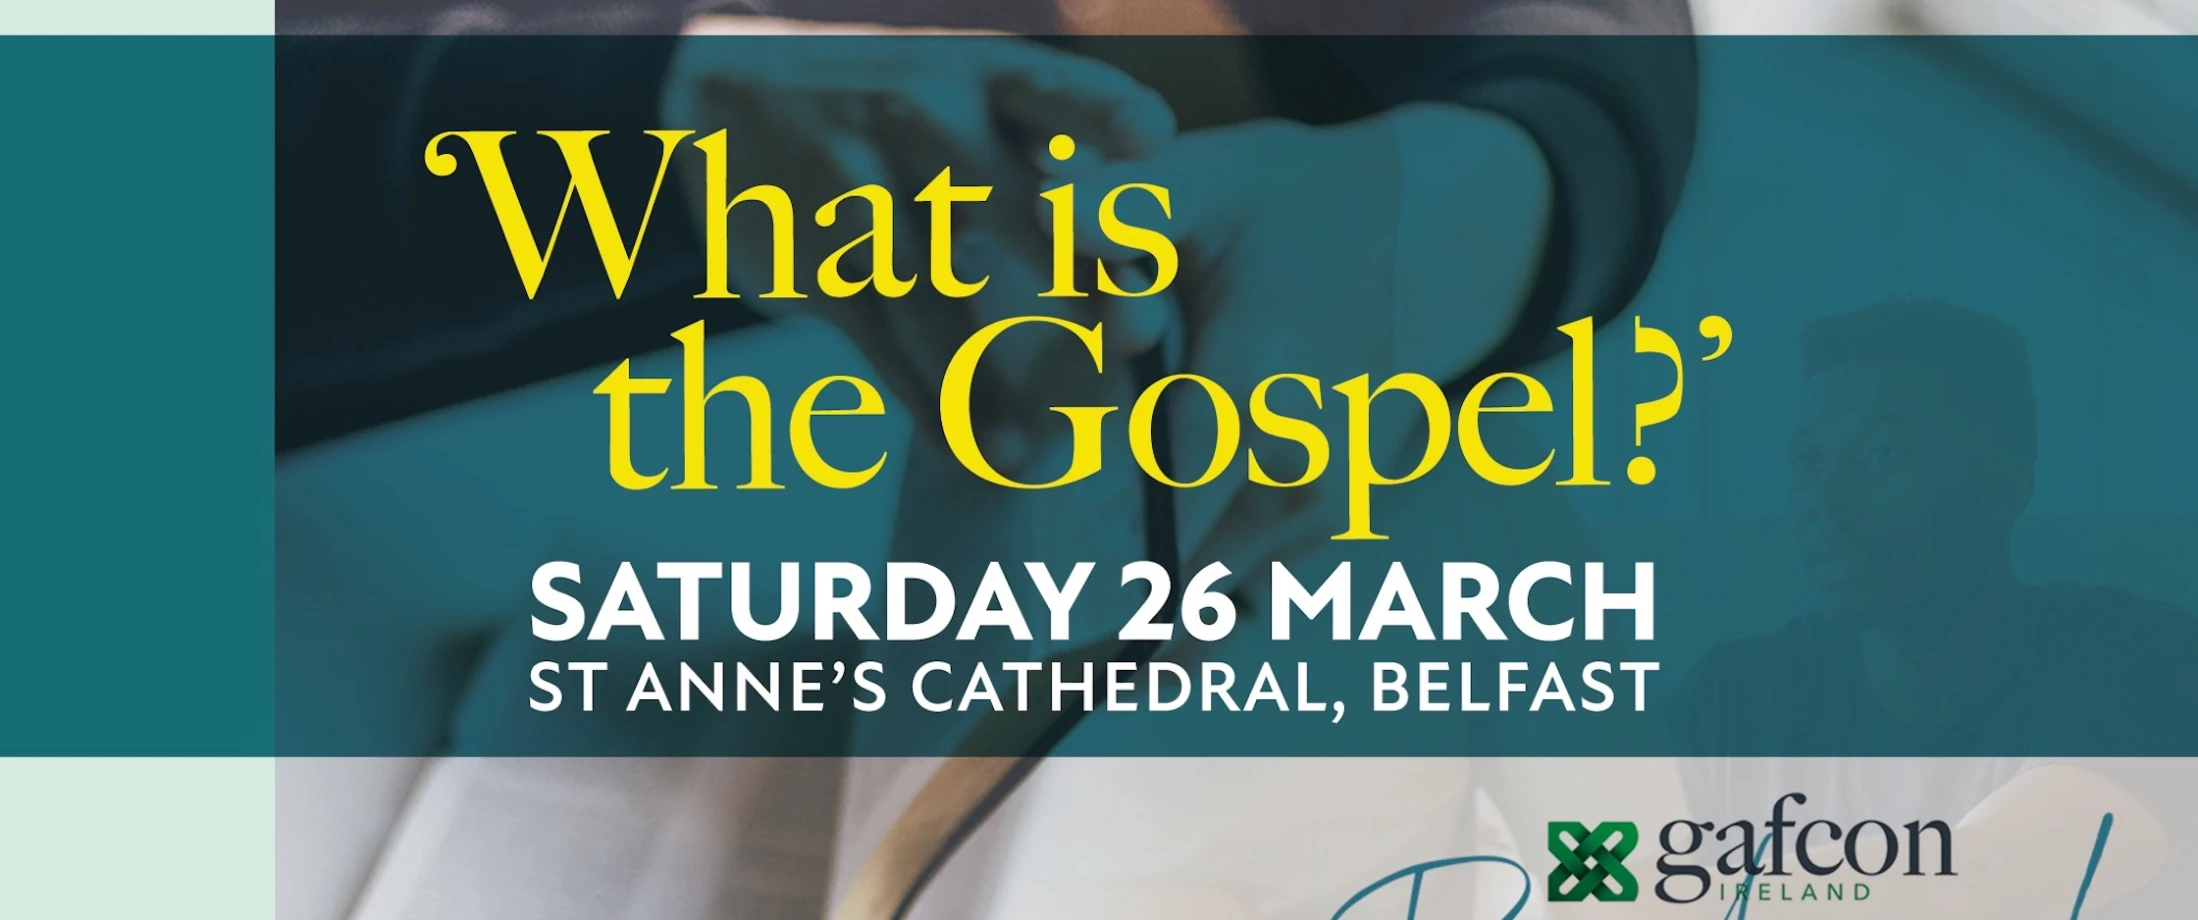 Gafcon Ireland Bible Conference